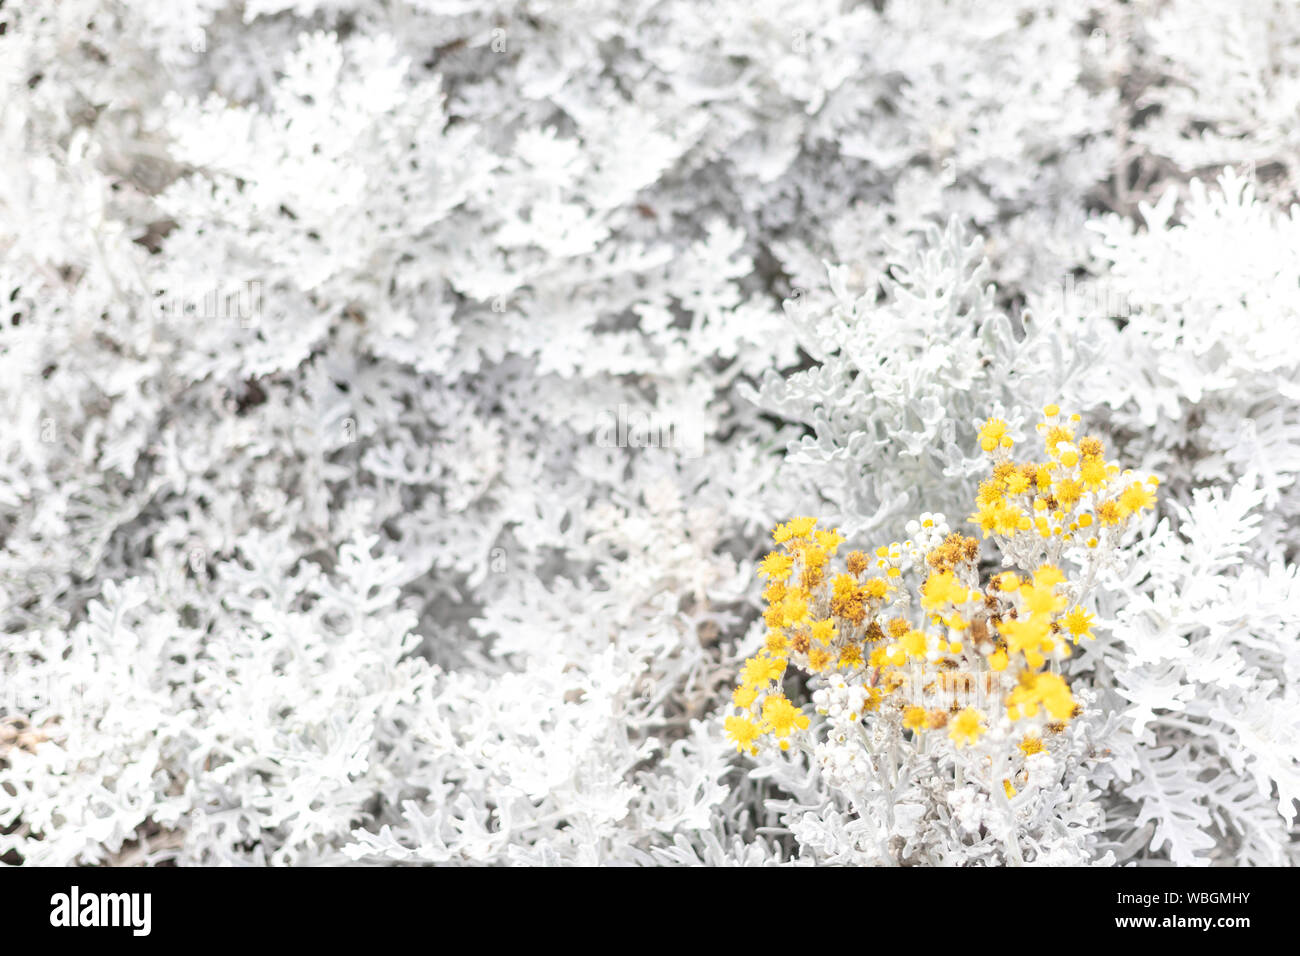 Beautiful Dusty miller (Senecio cineraria DC.) with yellow flowers in the garden. Soft focus Cineraria maritima silver dust leaves background. Stock Photo